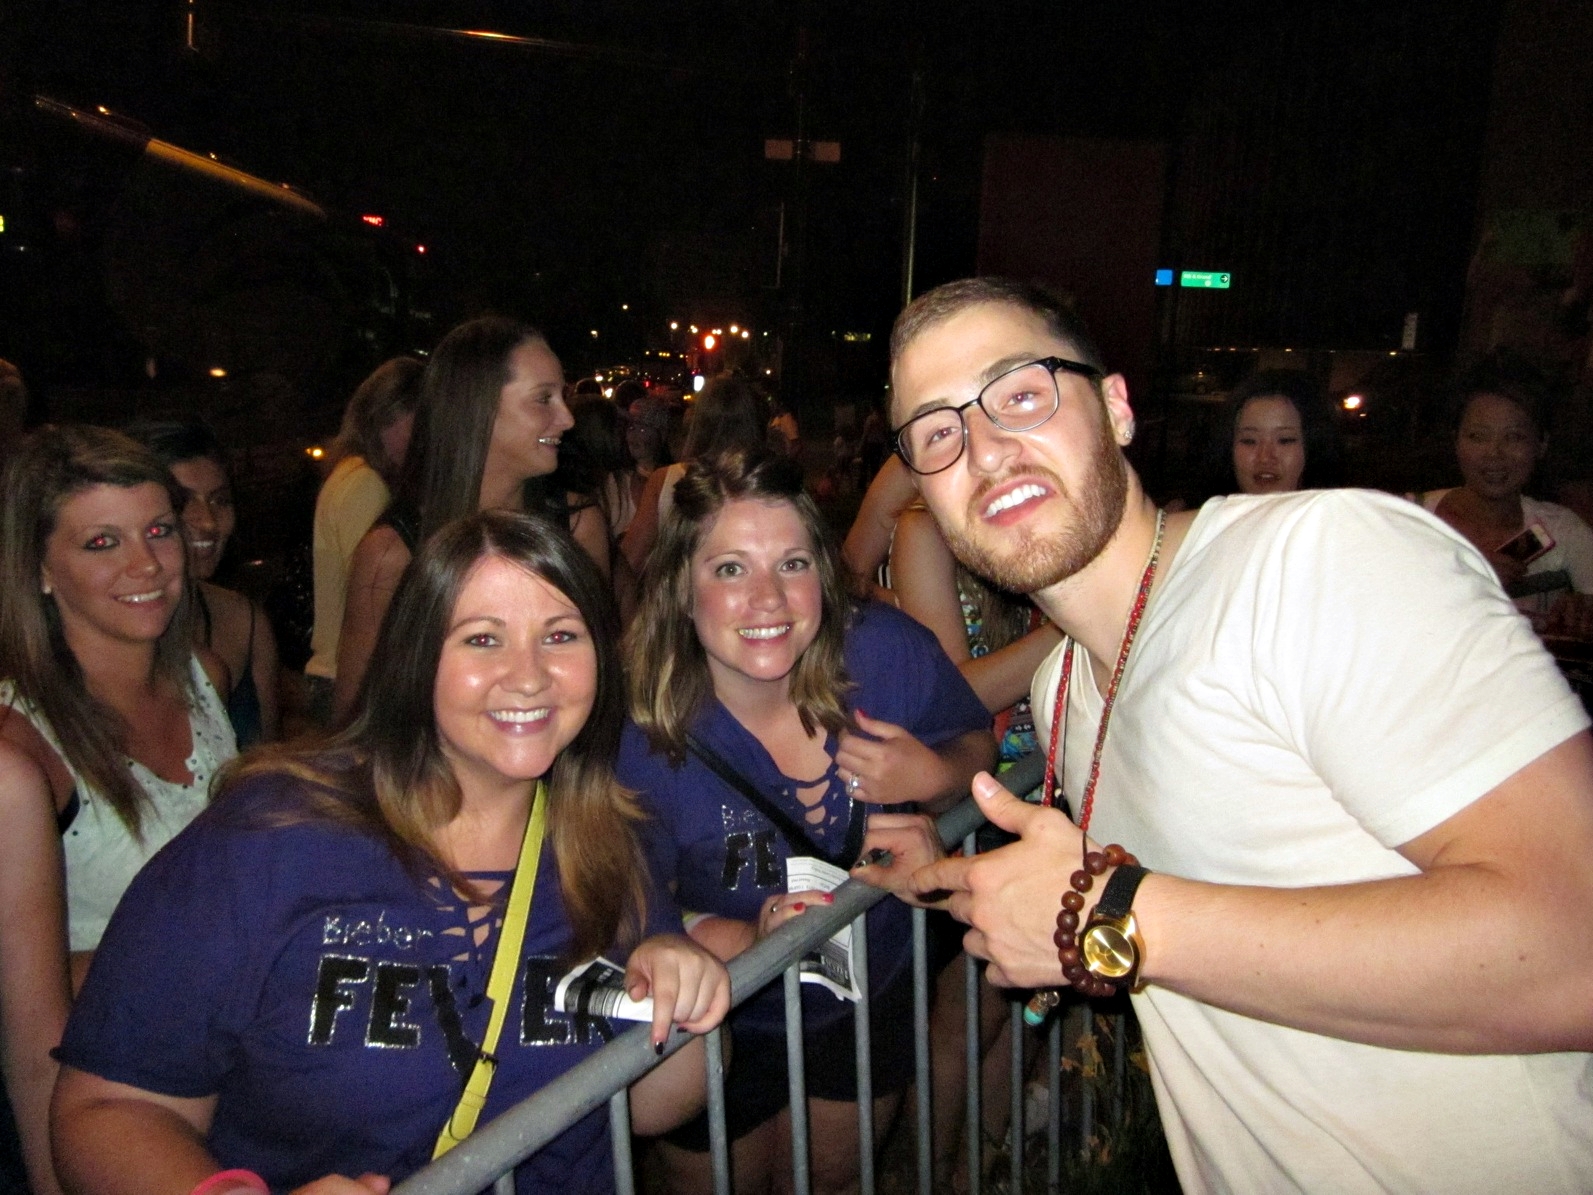 Jessica Wheeler, Katie Wheeler, and Mike Posner at Believe Tour in Des Moines, IA July 7, 2013
Photo by Katie Wheeler
